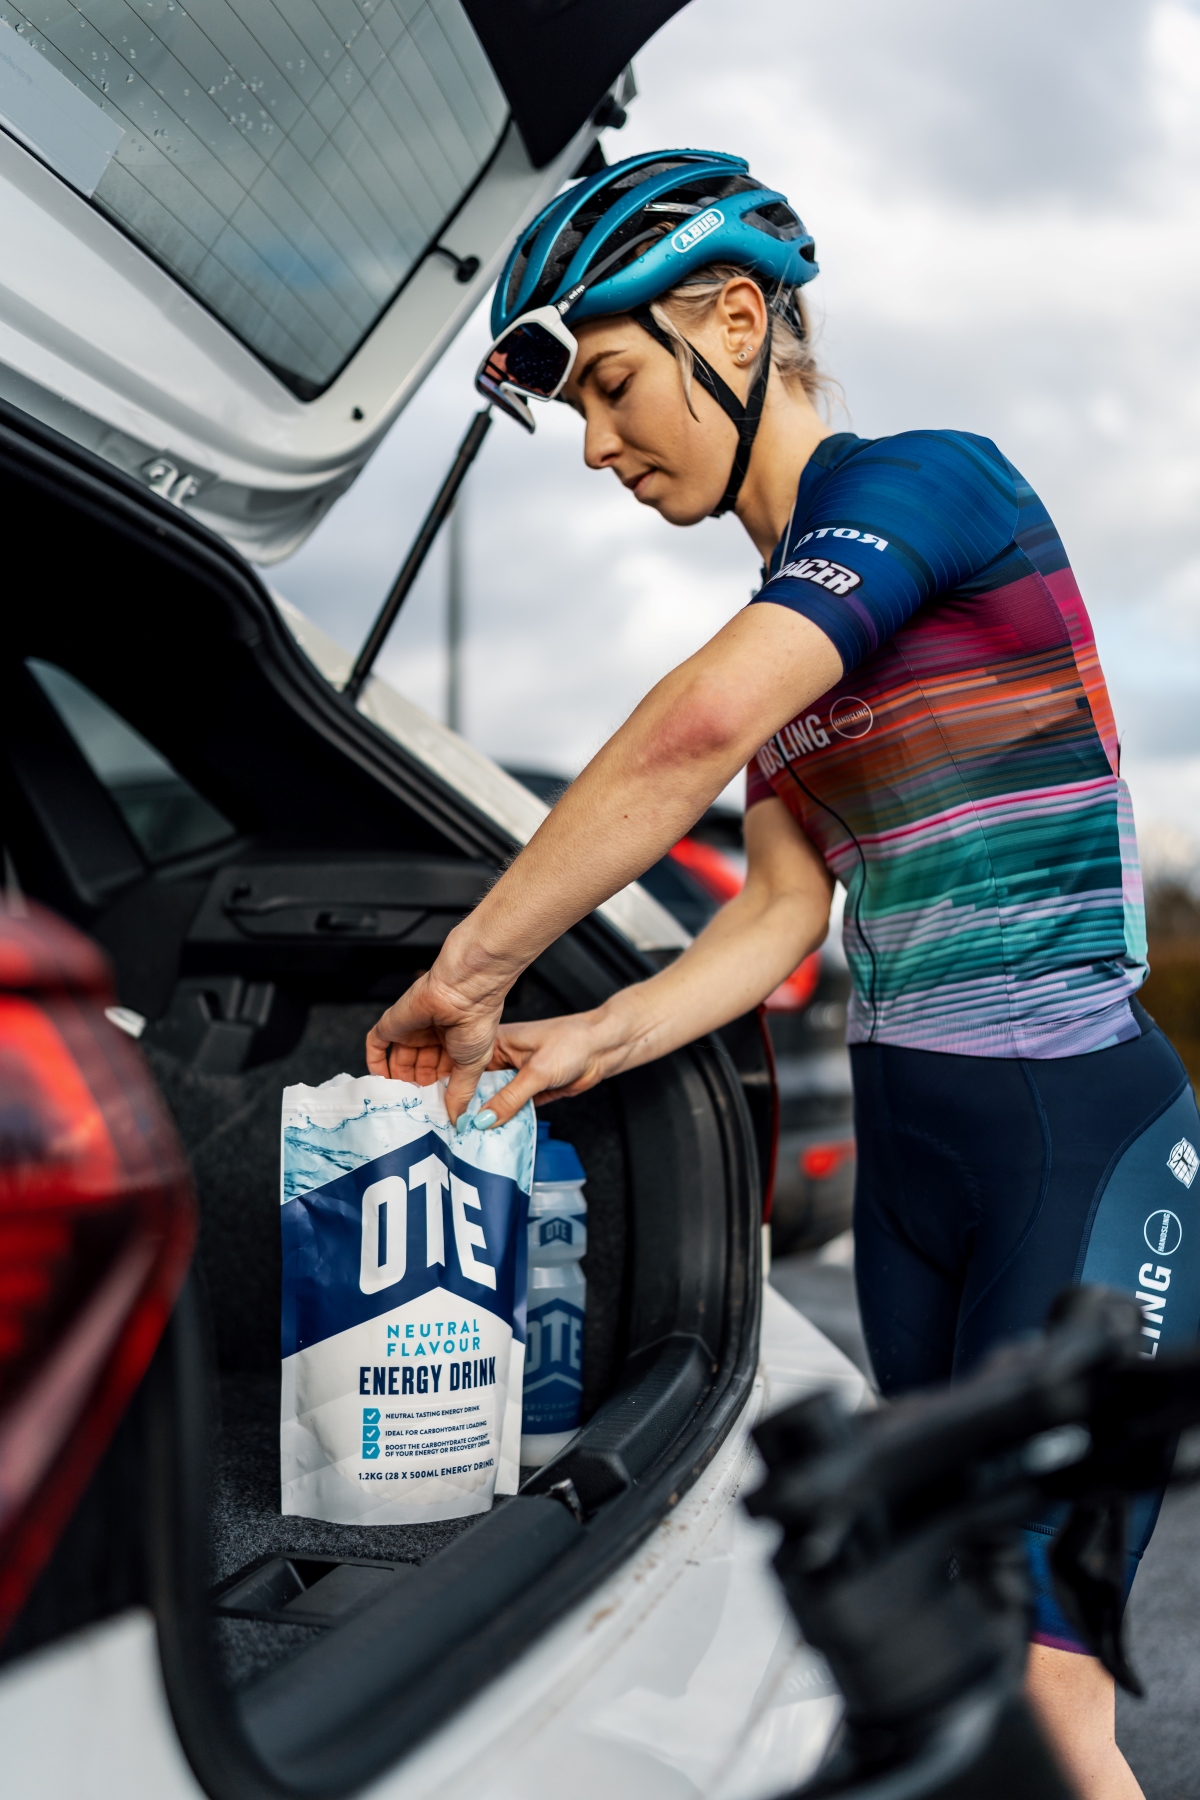 Triathlete refueling with OTE Sports hydration drink.